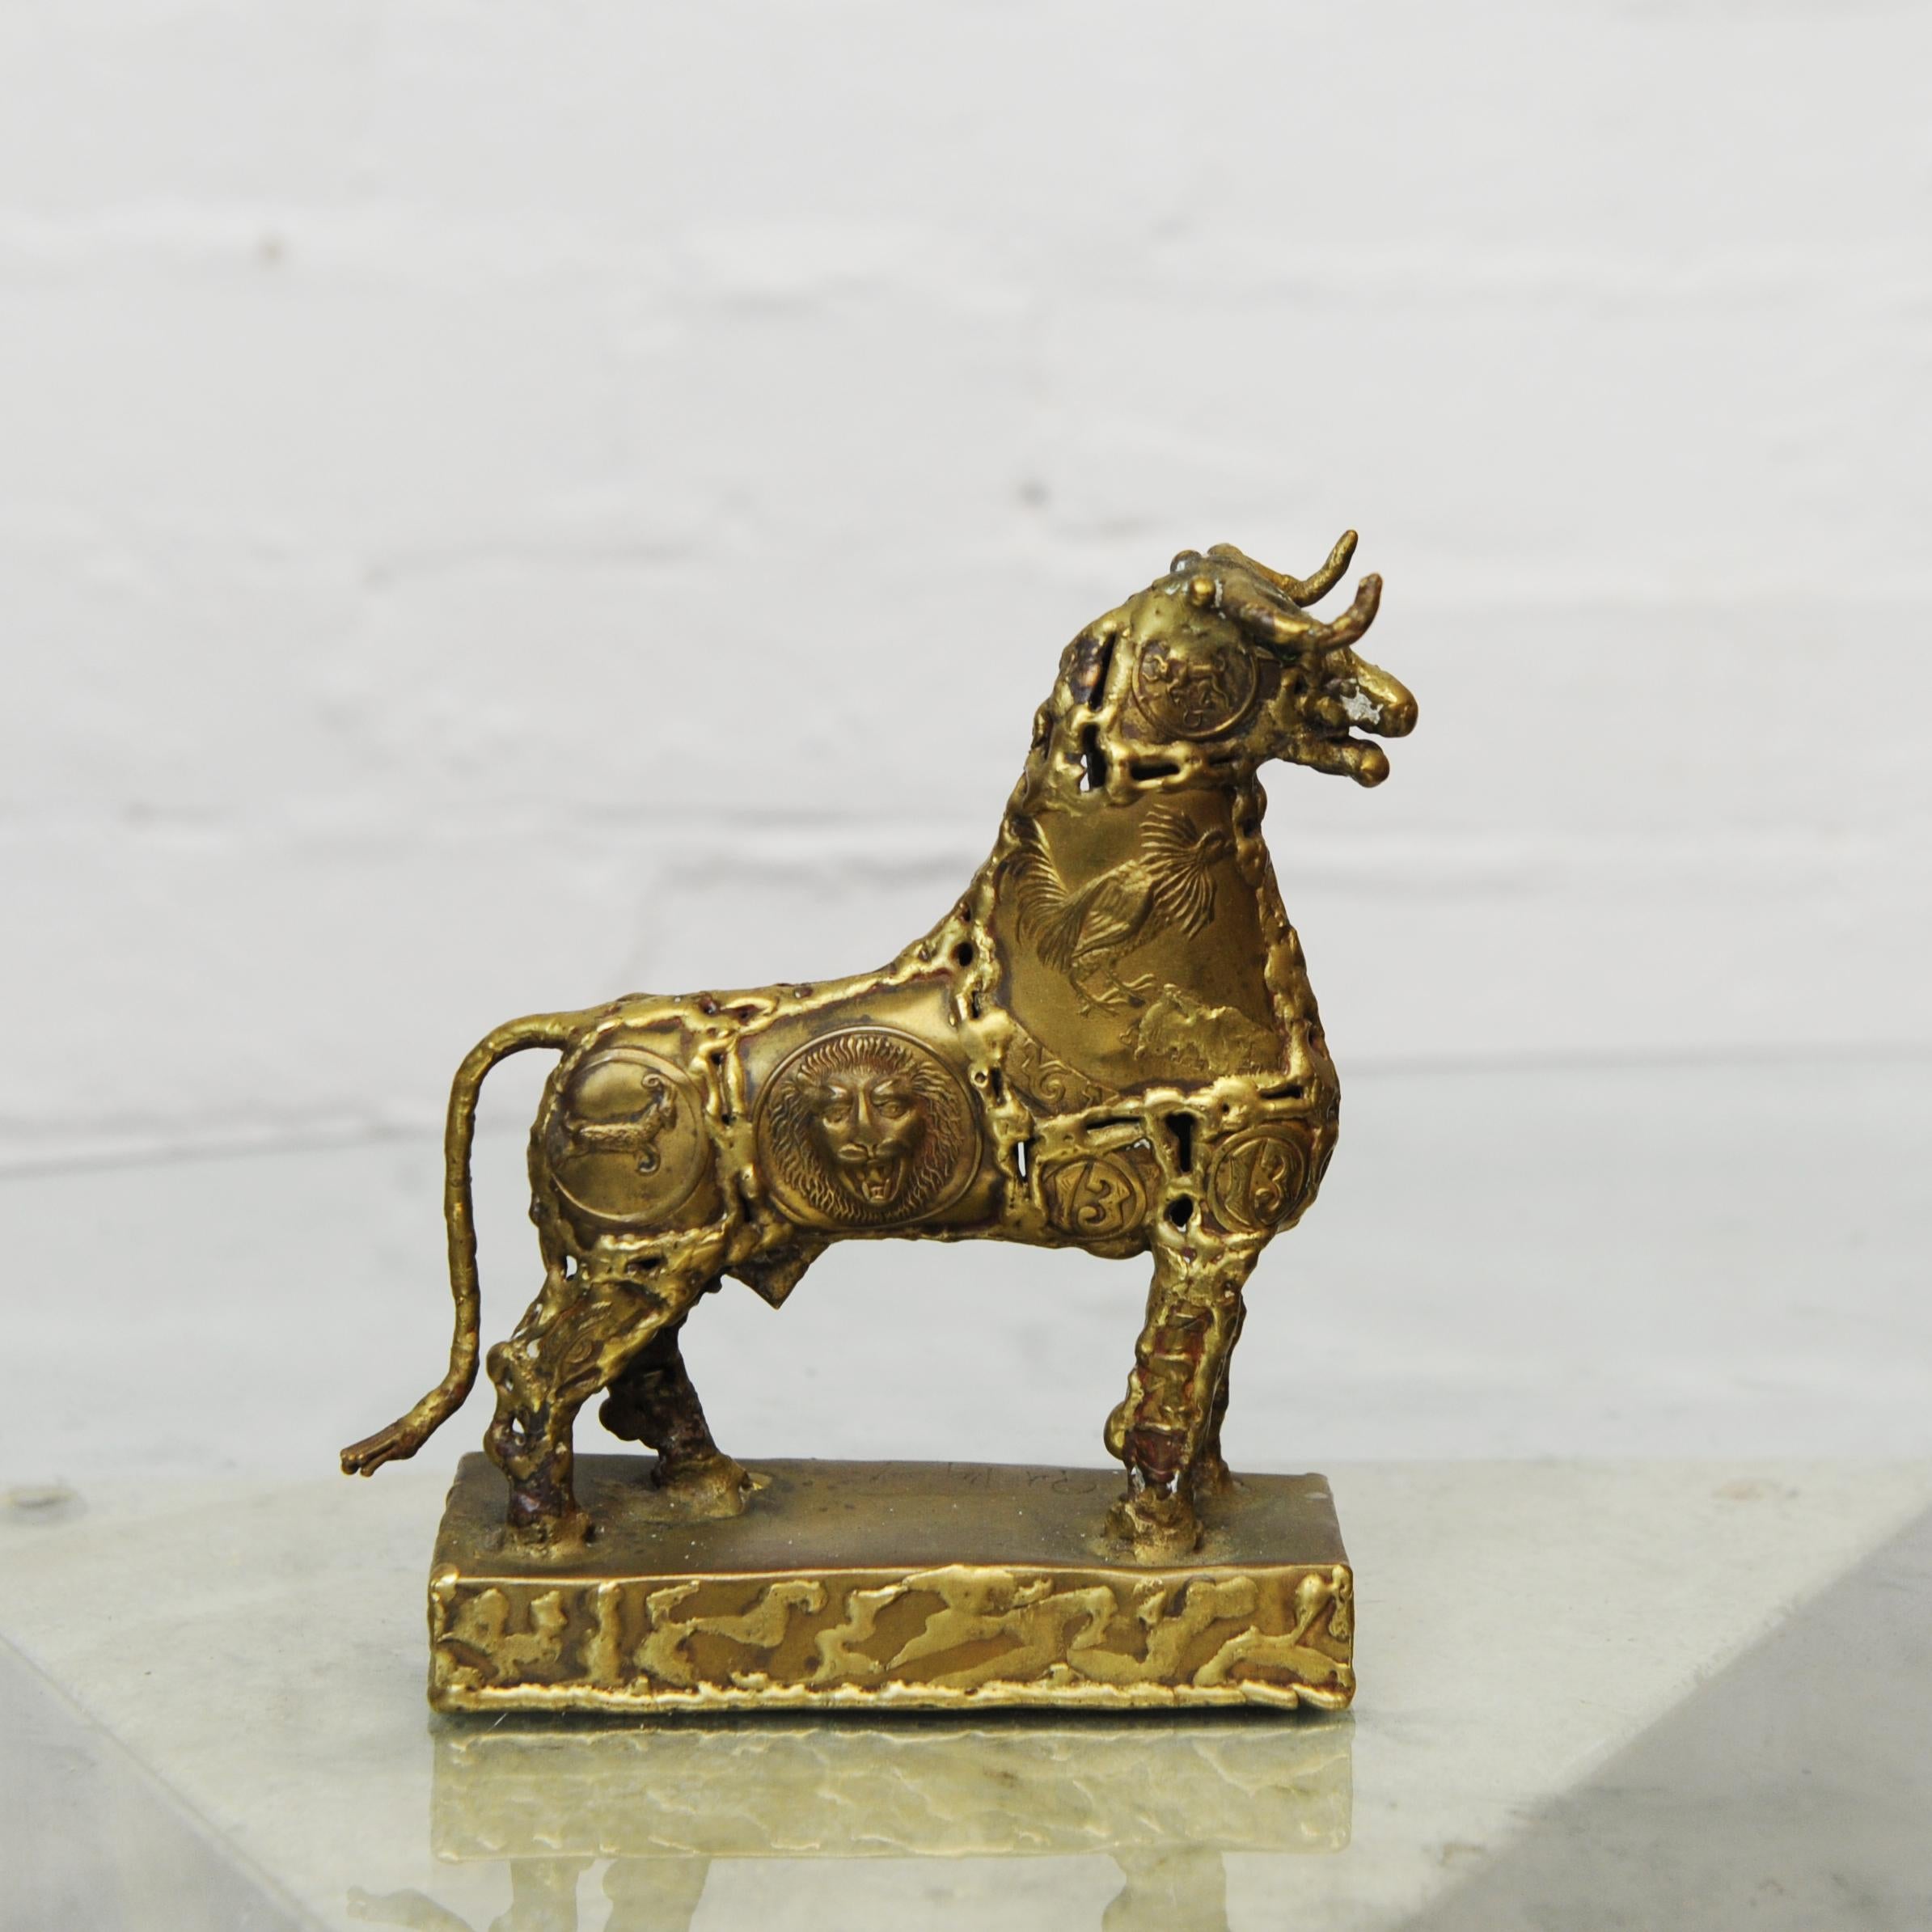 Brutalist Metal Sculpture of a Brass Bull by Pal Kepenyes, 1970s For Sale 2